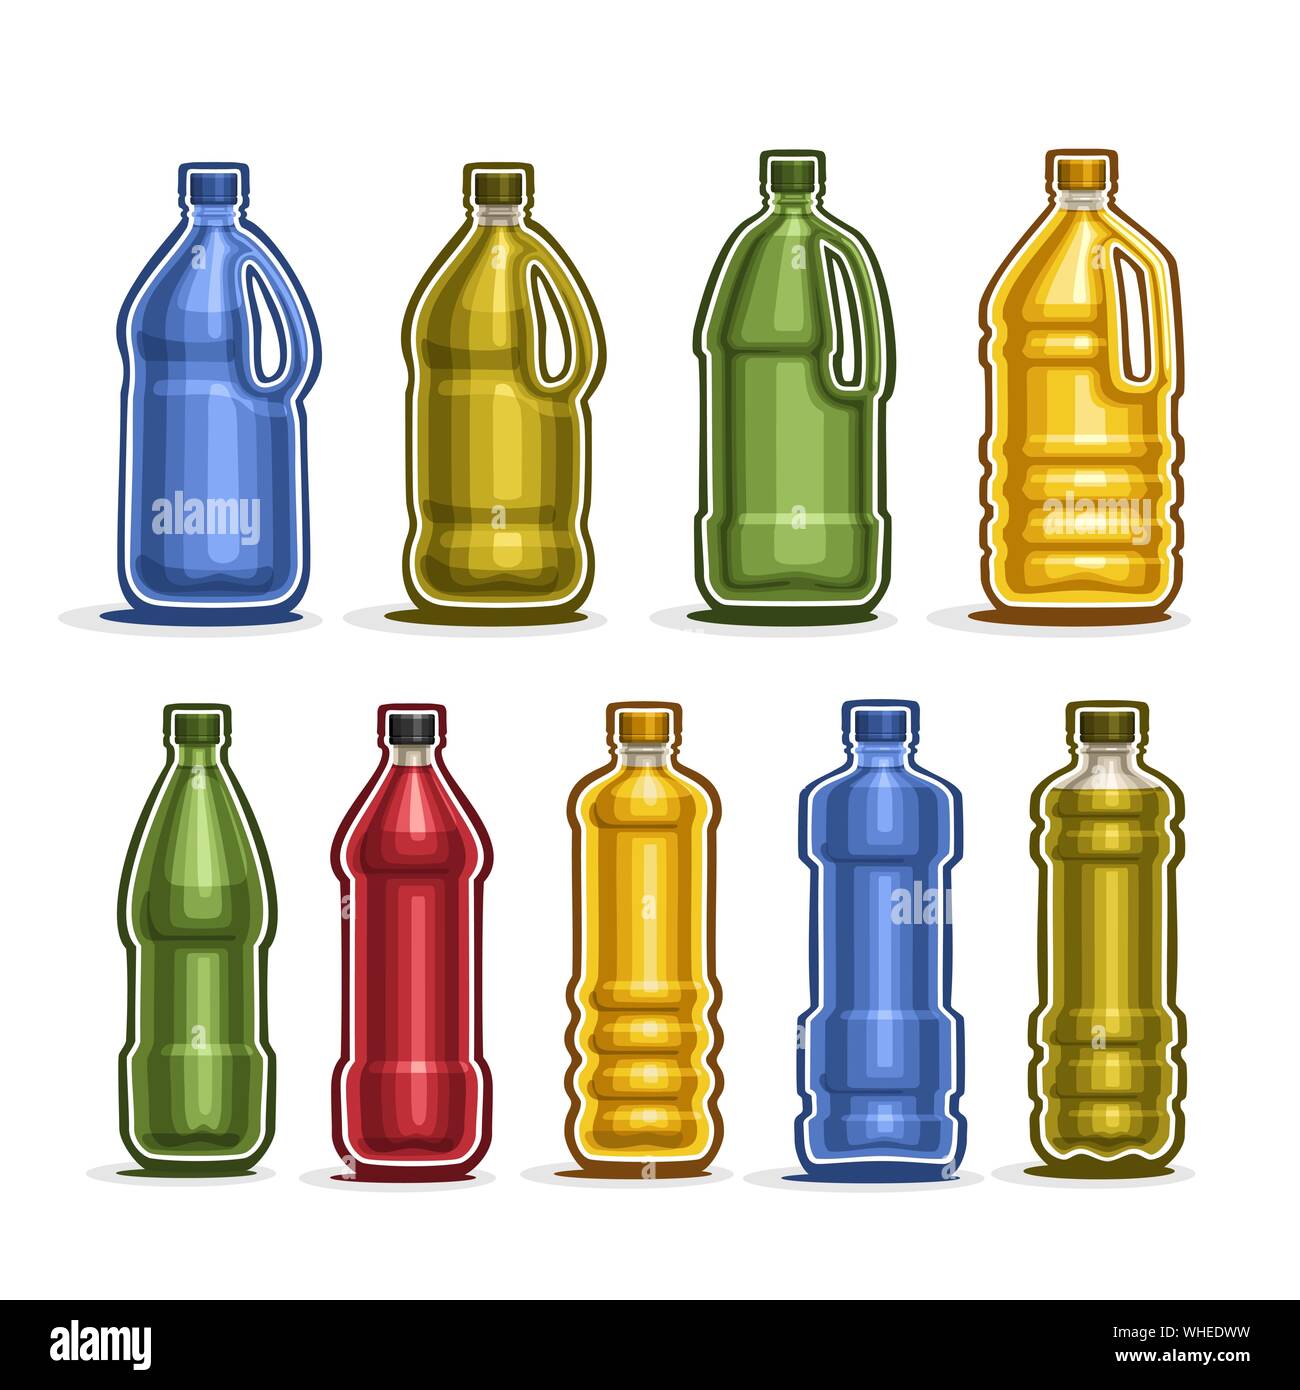 https://c8.alamy.com/comp/WHEDWW/vector-set-of-colored-big-plastic-bottles-with-cap-for-water-9-full-colorful-yellow-and-green-gallon-containers-with-handle-for-cooking-oil-or-chemic-WHEDWW.jpg